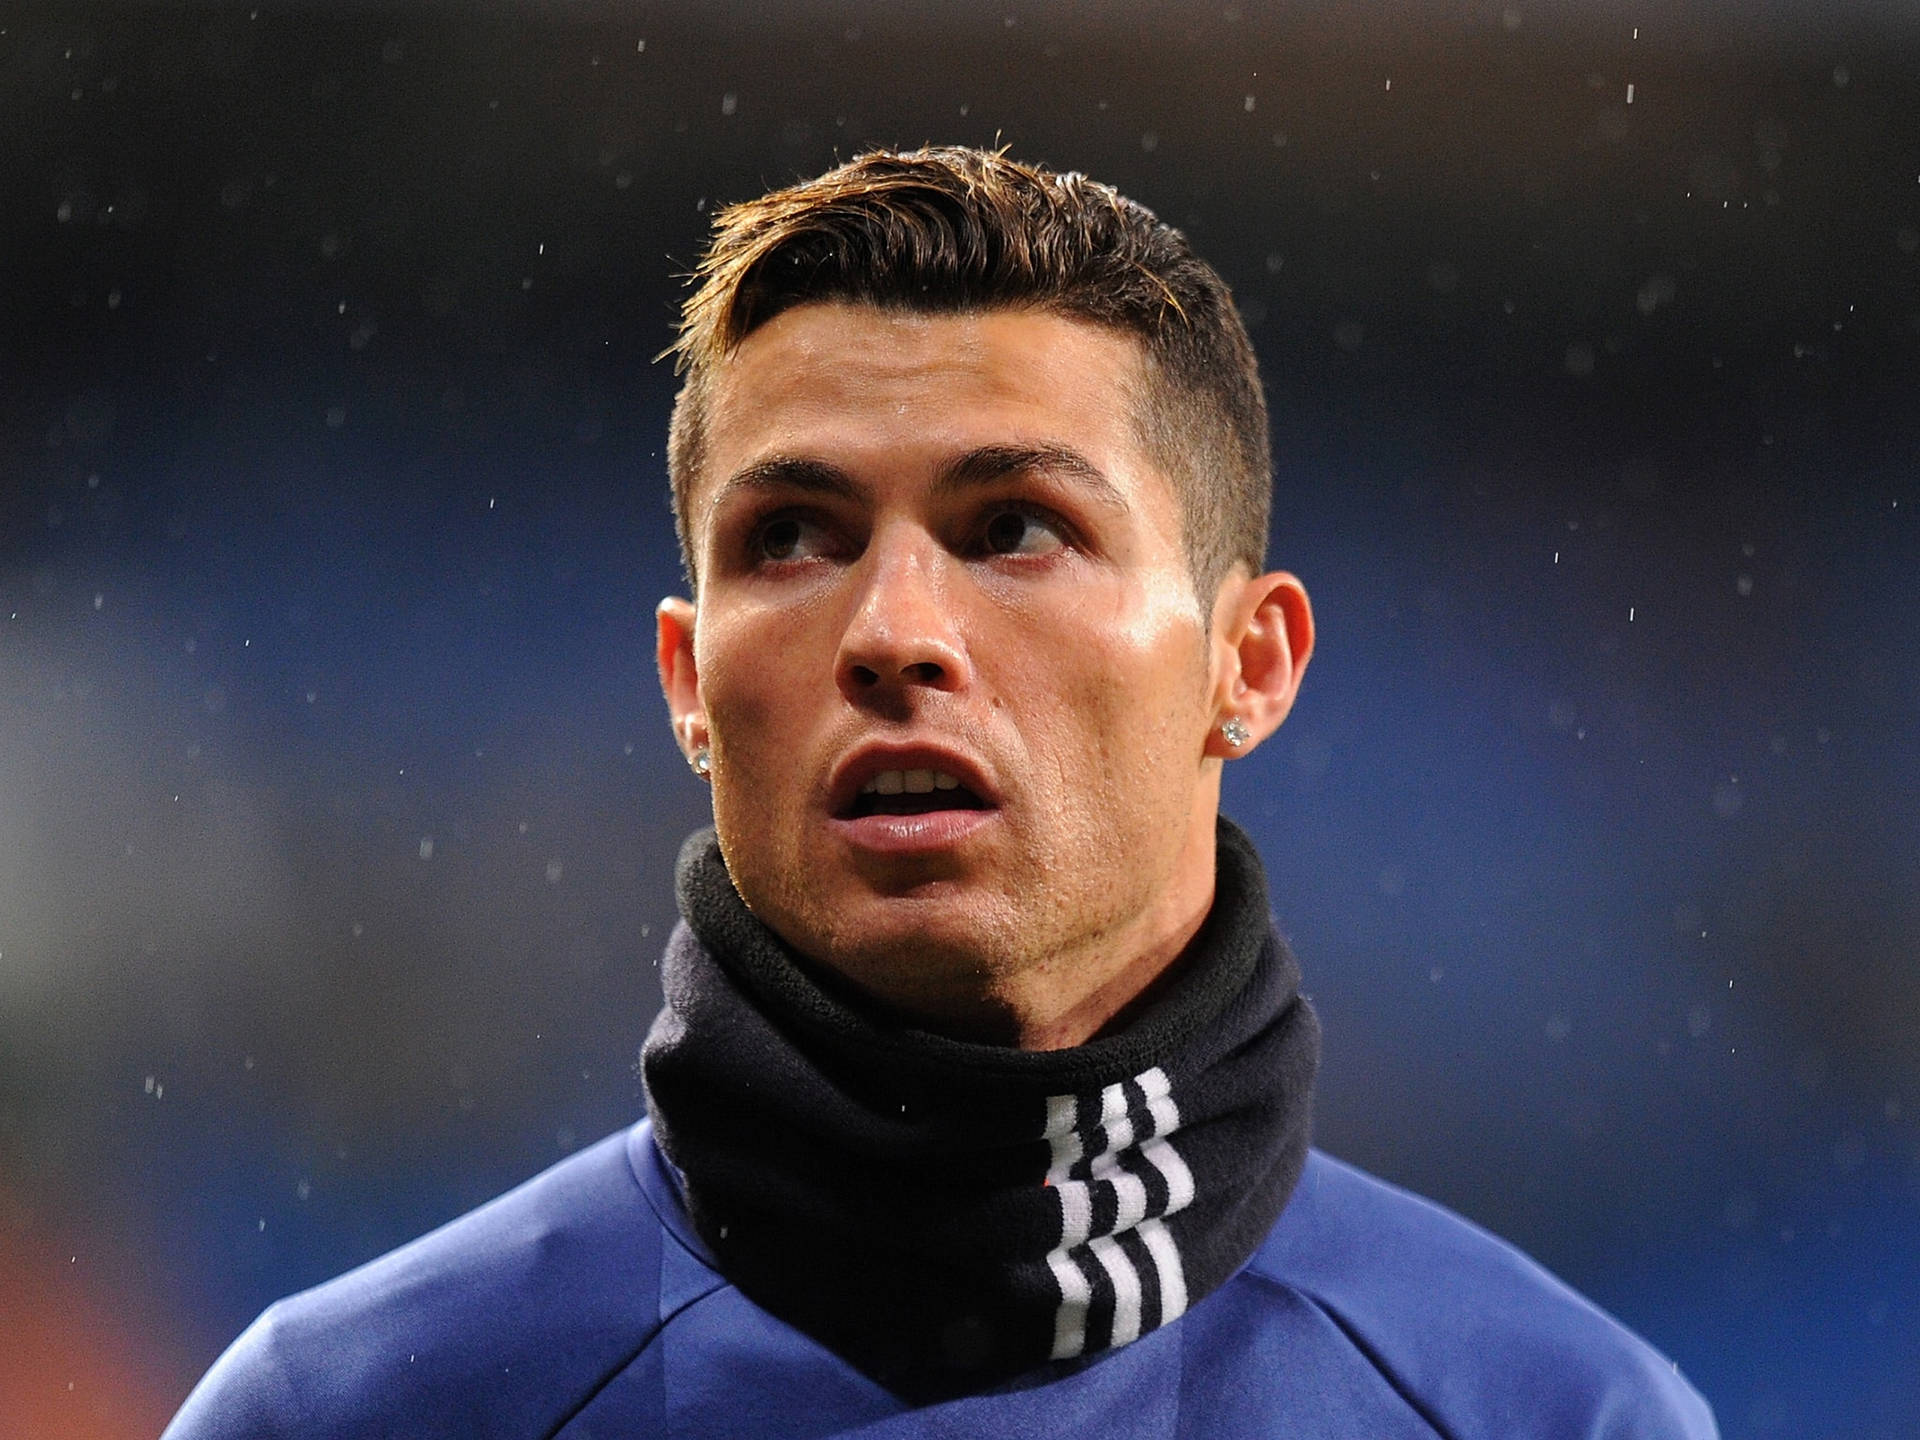 Cristiano Ronaldo Concentrates on the Soccer Pitch Wallpaper